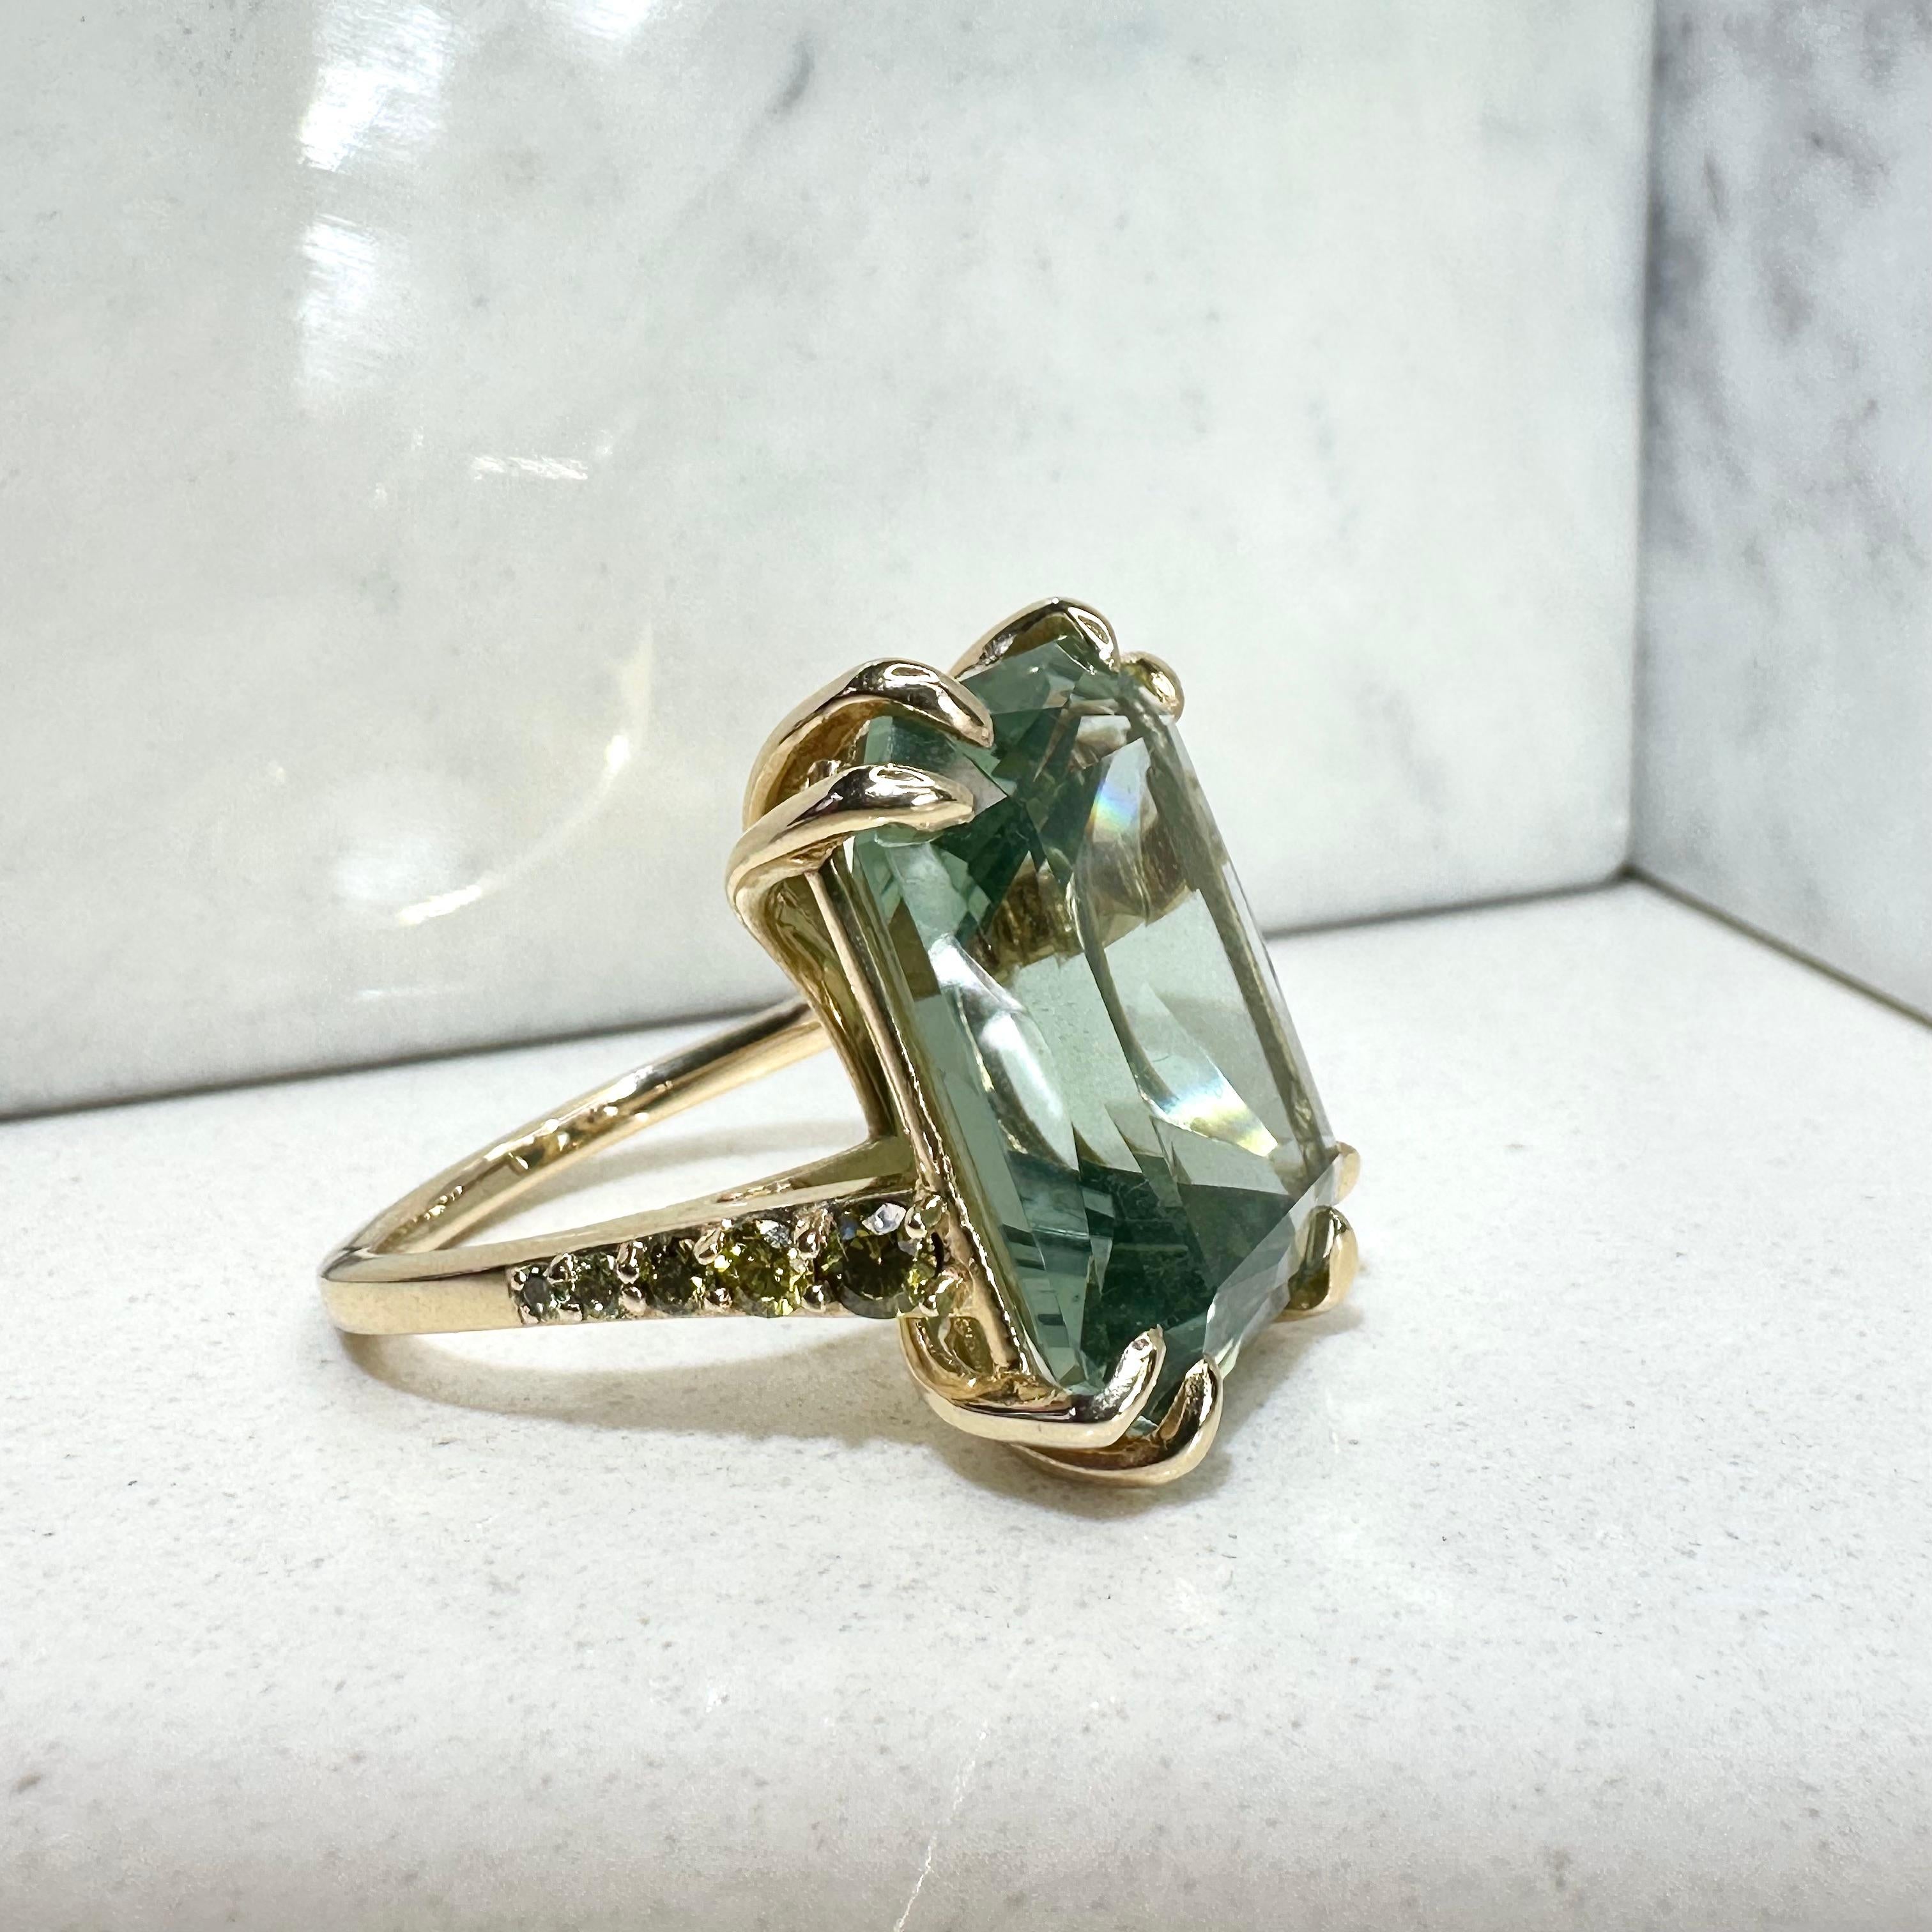 Kristin Hanson natural green diamond ring with special cut 23ct prasiolite, green amethyst gemstone cocktail ring set 14k gold. 

The forest is a mystical place, full of life and color. Recreating the decadent richness of the forest's depth in this